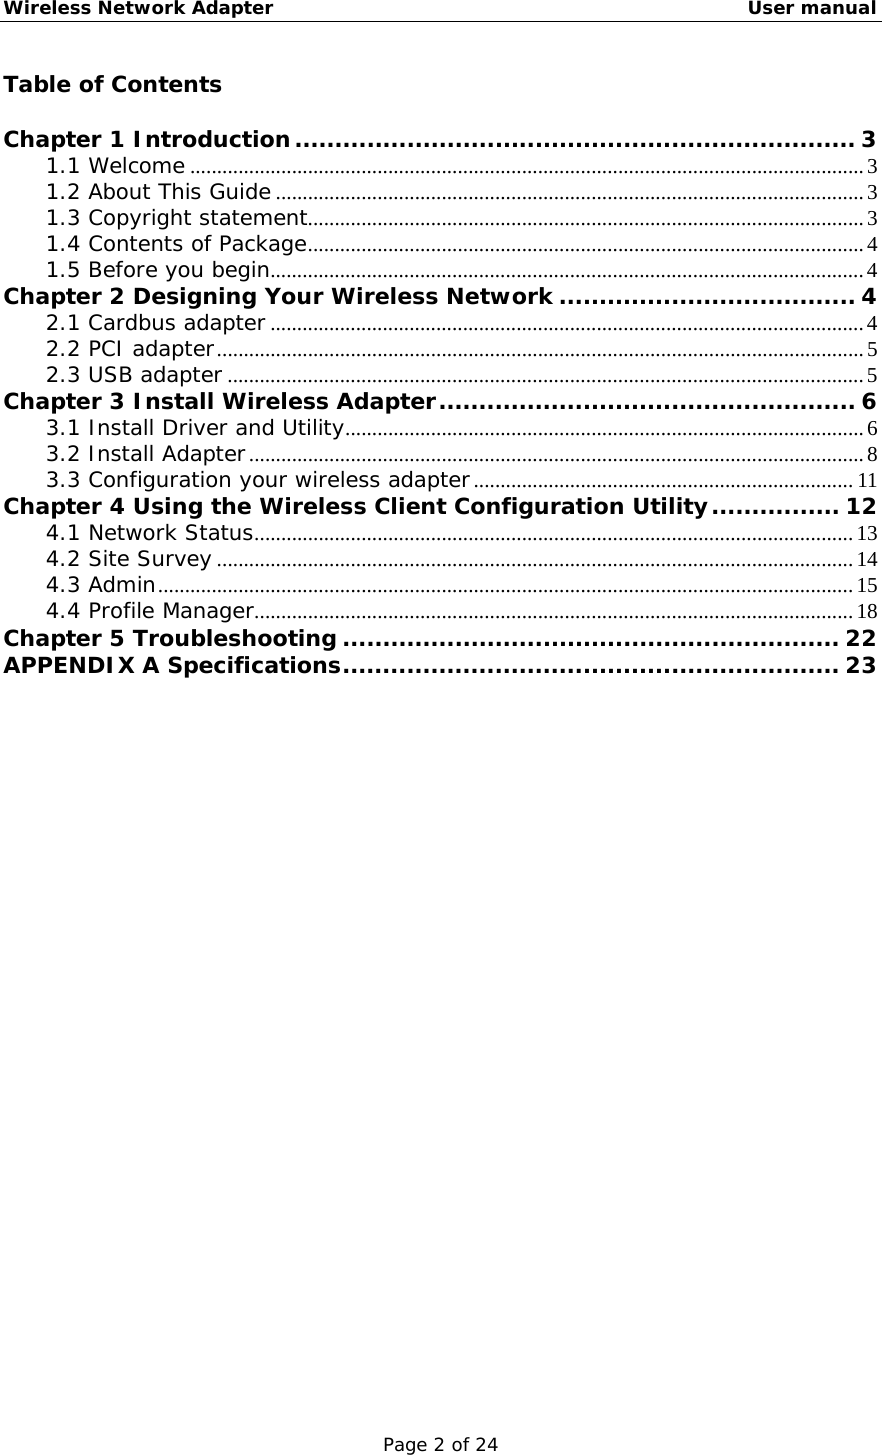 Wireless Network Adapter                                                    User manual Page 2 of 24 Table of Contents  Chapter 1 Introduction...................................................................... 3 1.1 Welcome ..............................................................................................................................3 1.2 About This Guide..............................................................................................................3 1.3 Copyright statement........................................................................................................3 1.4 Contents of Package........................................................................................................4 1.5 Before you begin...............................................................................................................4 Chapter 2 Designing Your Wireless Network ..................................... 4 2.1 Cardbus adapter ...............................................................................................................4 2.2 PCI adapter.........................................................................................................................5 2.3 USB adapter .......................................................................................................................5 Chapter 3 Install Wireless Adapter.................................................... 6 3.1 Install Driver and Utility.................................................................................................6 3.2 Install Adapter...................................................................................................................8 3.3 Configuration your wireless adapter.......................................................................11 Chapter 4 Using the Wireless Client Configuration Utility................ 12 4.1 Network Status................................................................................................................13 4.2 Site Survey .......................................................................................................................14 4.3 Admin..................................................................................................................................15 4.4 Profile Manager................................................................................................................18 Chapter 5 Troubleshooting .............................................................. 22 APPENDIX A Specifications.............................................................. 23                           